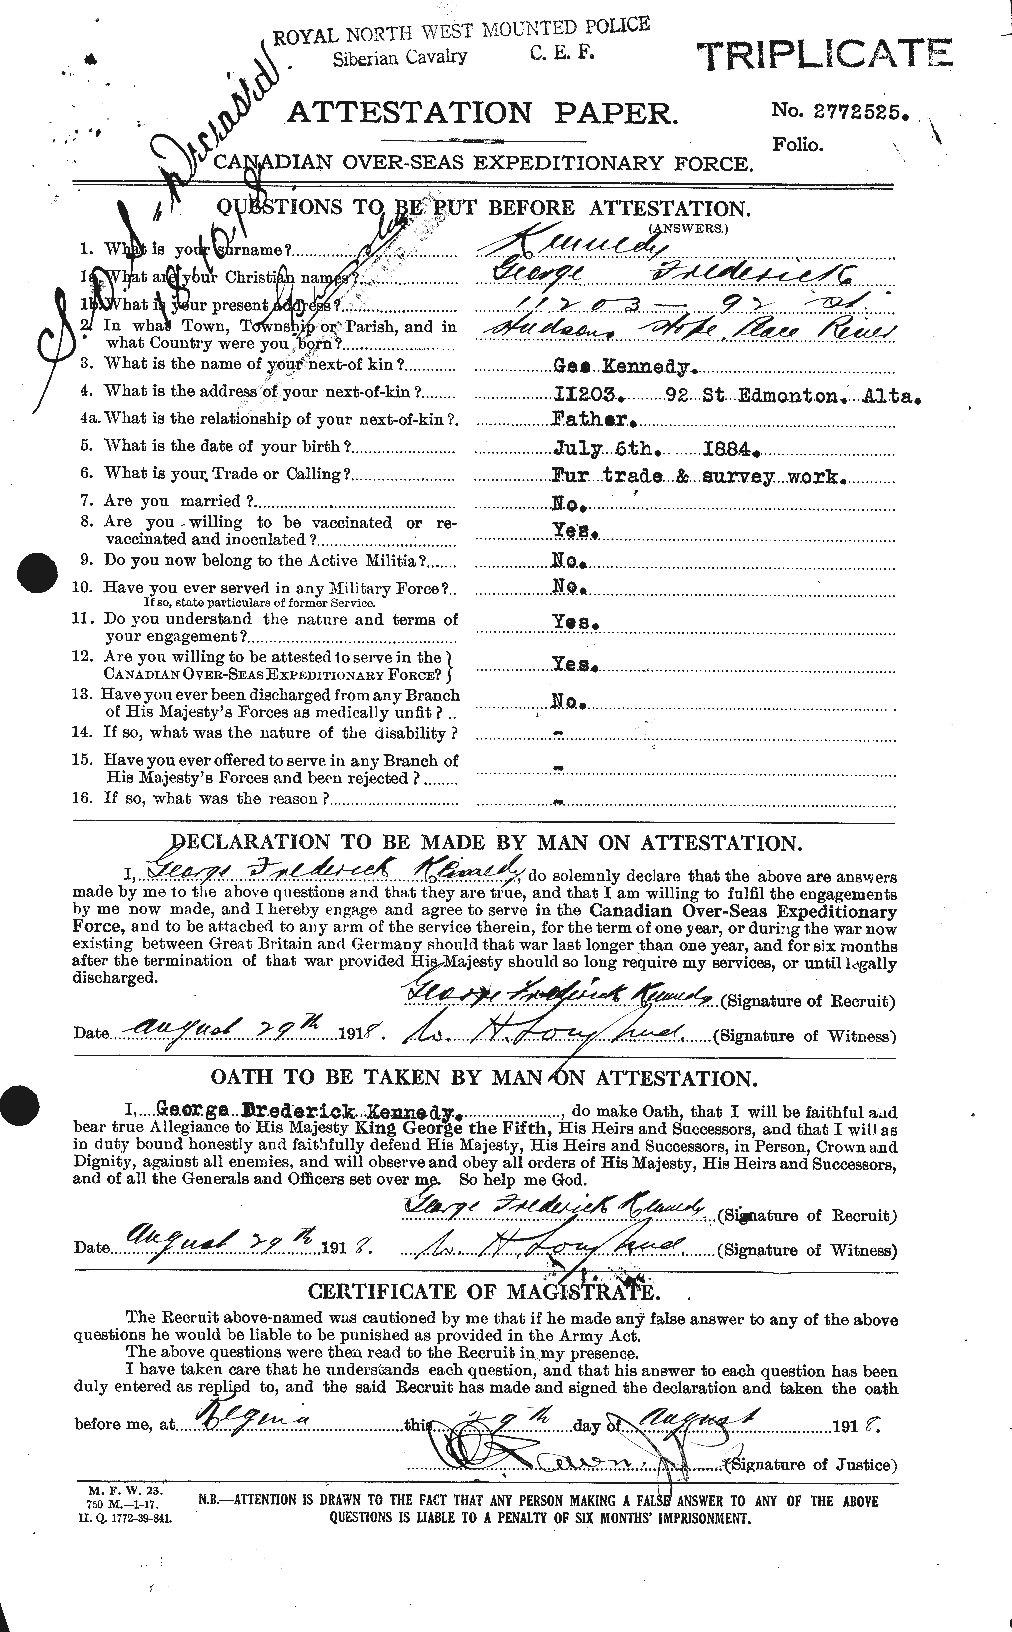 Personnel Records of the First World War - CEF 428794a